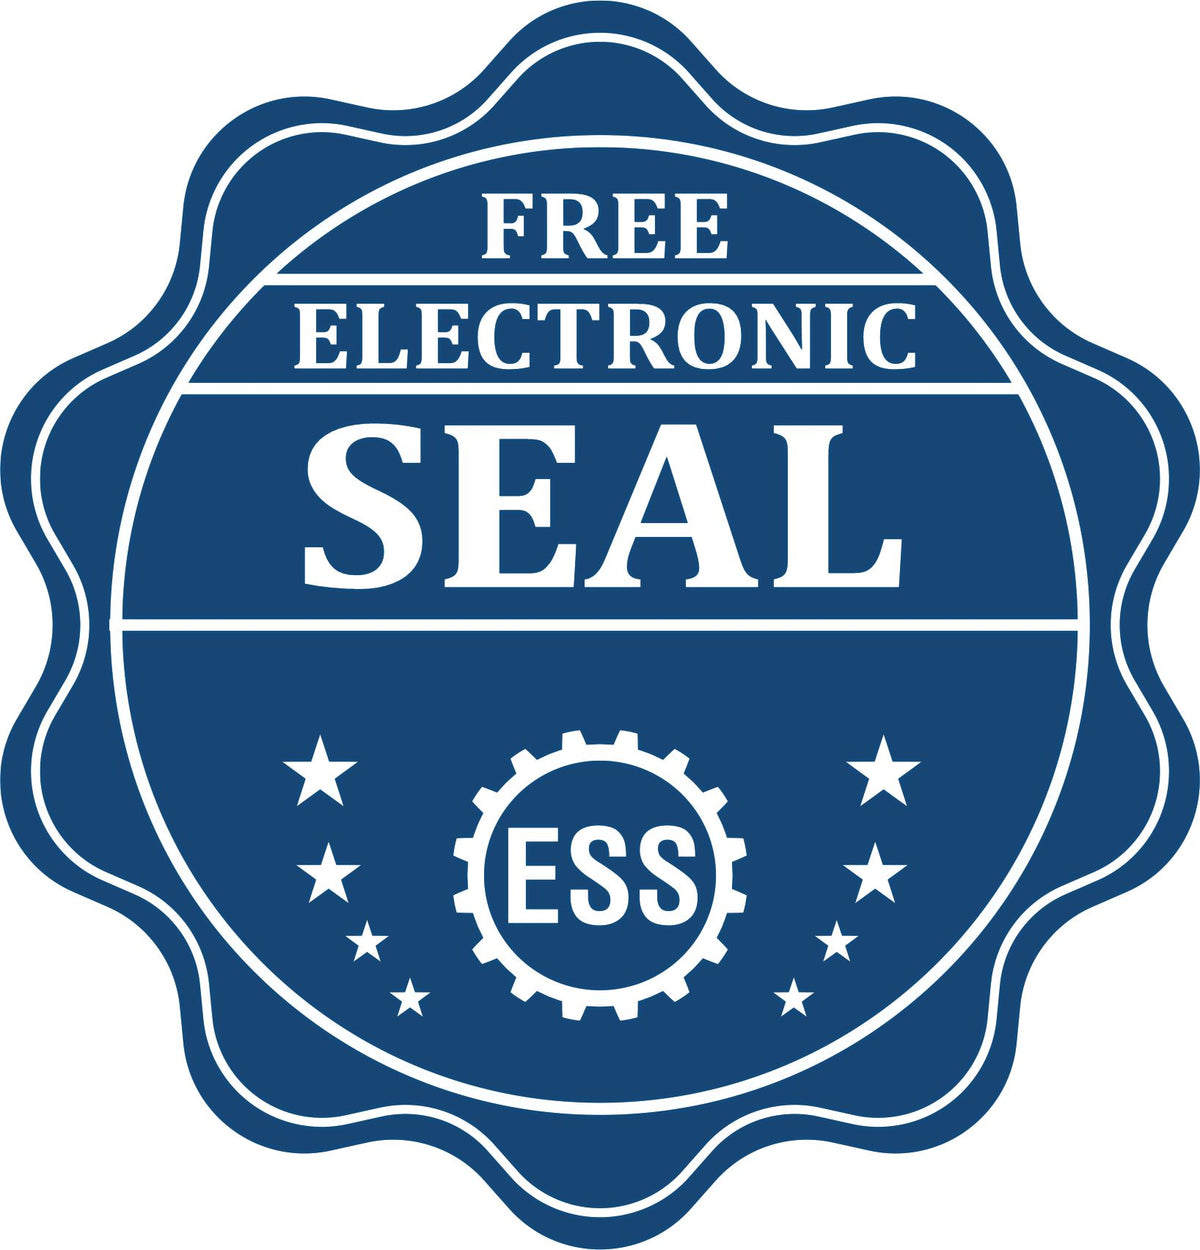 A badge showing a free electronic seal for the State of Utah Architectural Seal Embosser with stars and the ESS gear on the emblem.